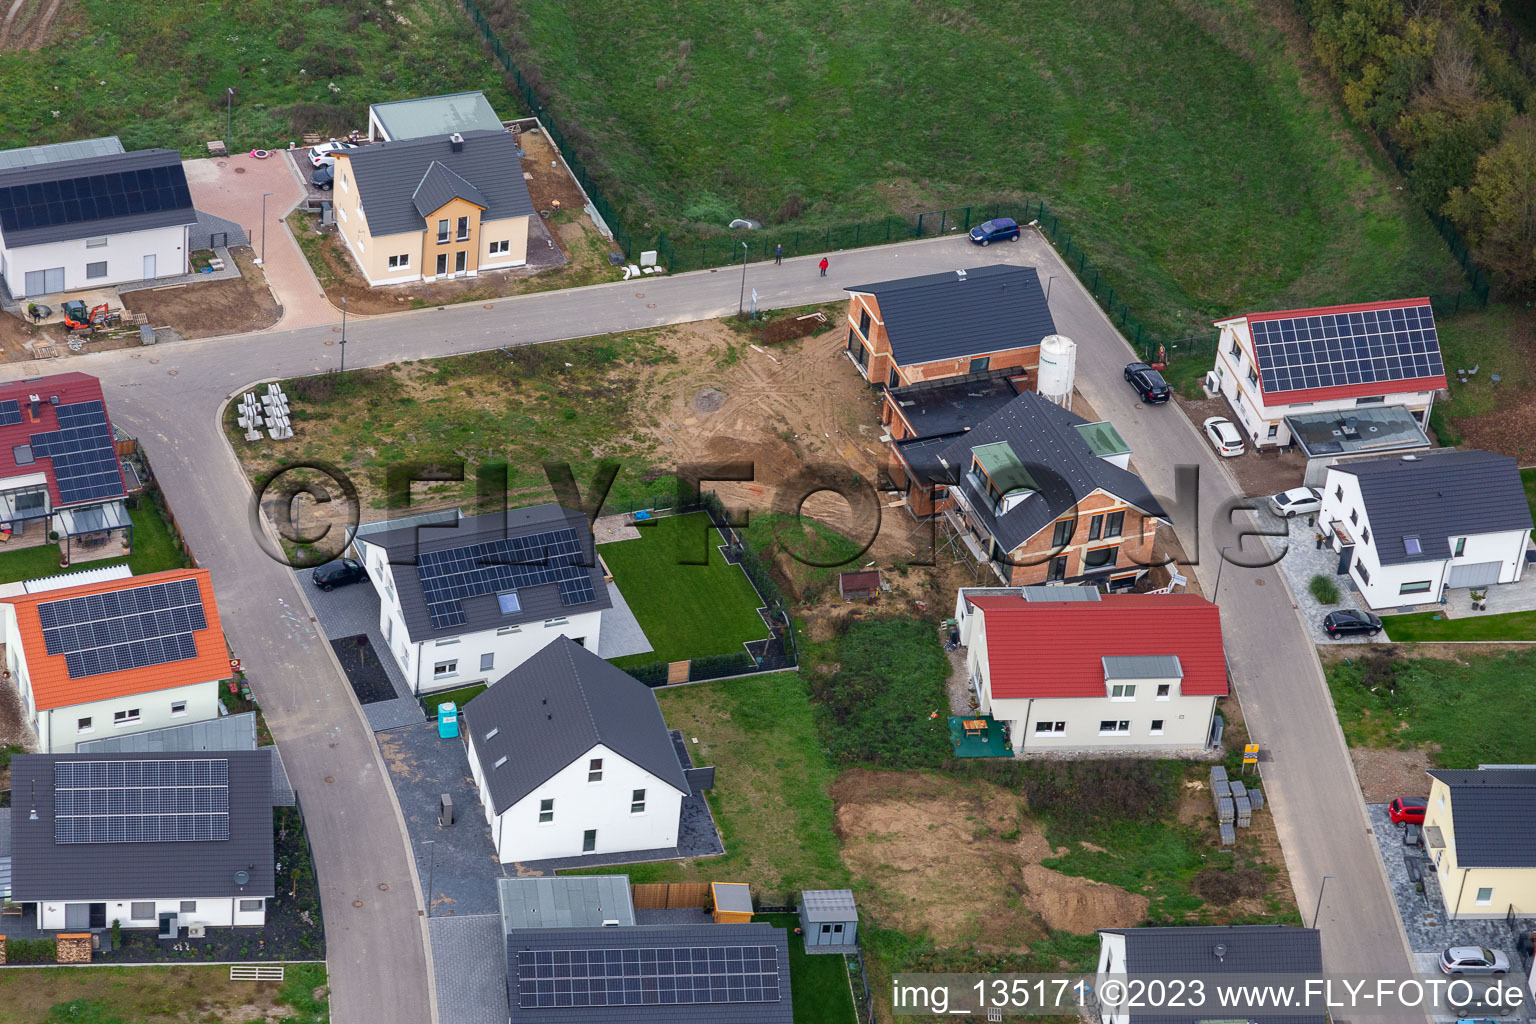 New development area K2 in Kandel in the state Rhineland-Palatinate, Germany from a drone